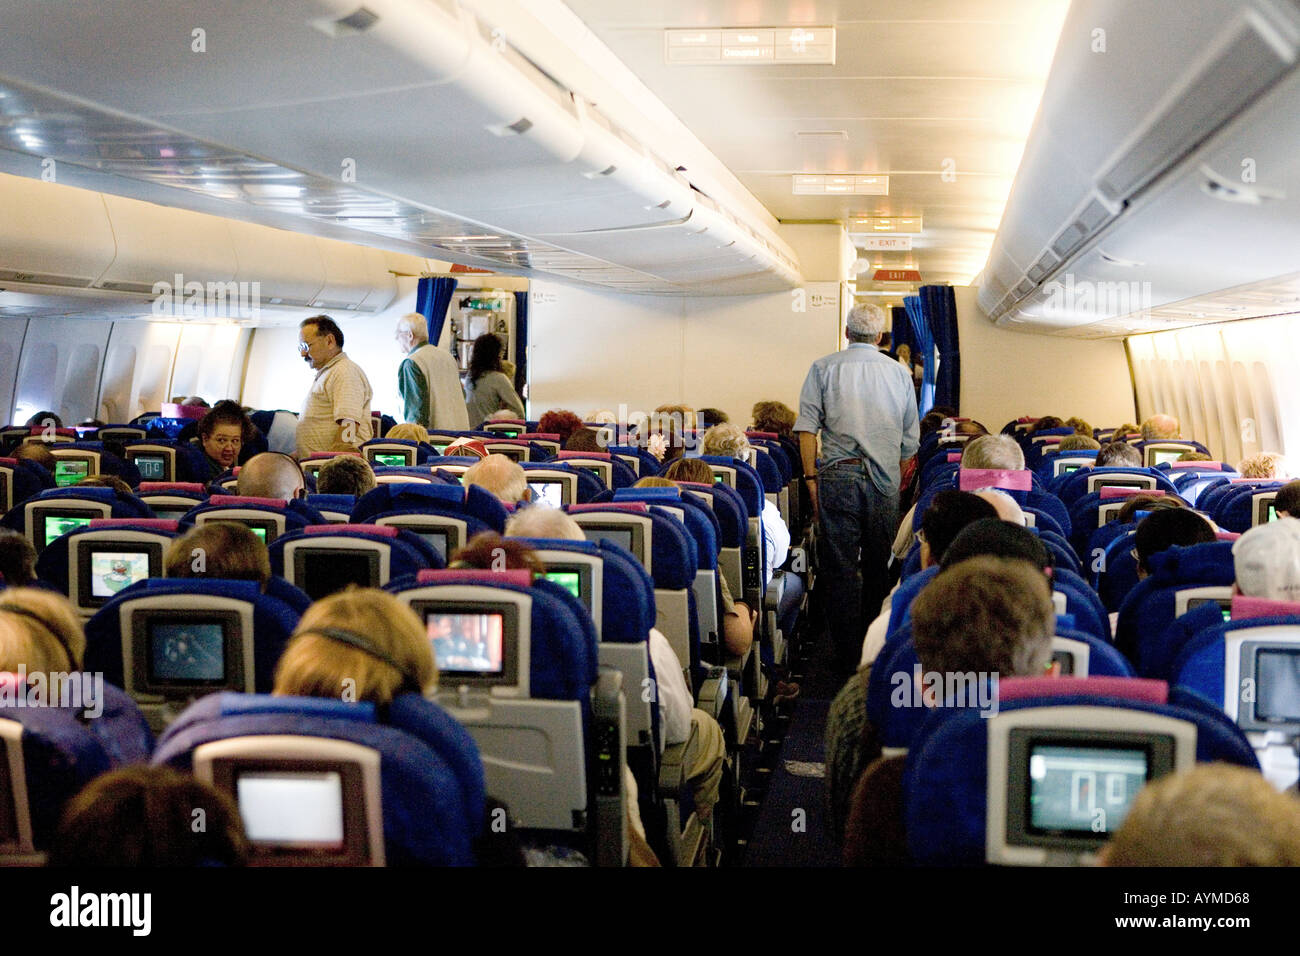 Economy cabin activity on a 747 aircraft during a trans atlantic flight Stock Photo